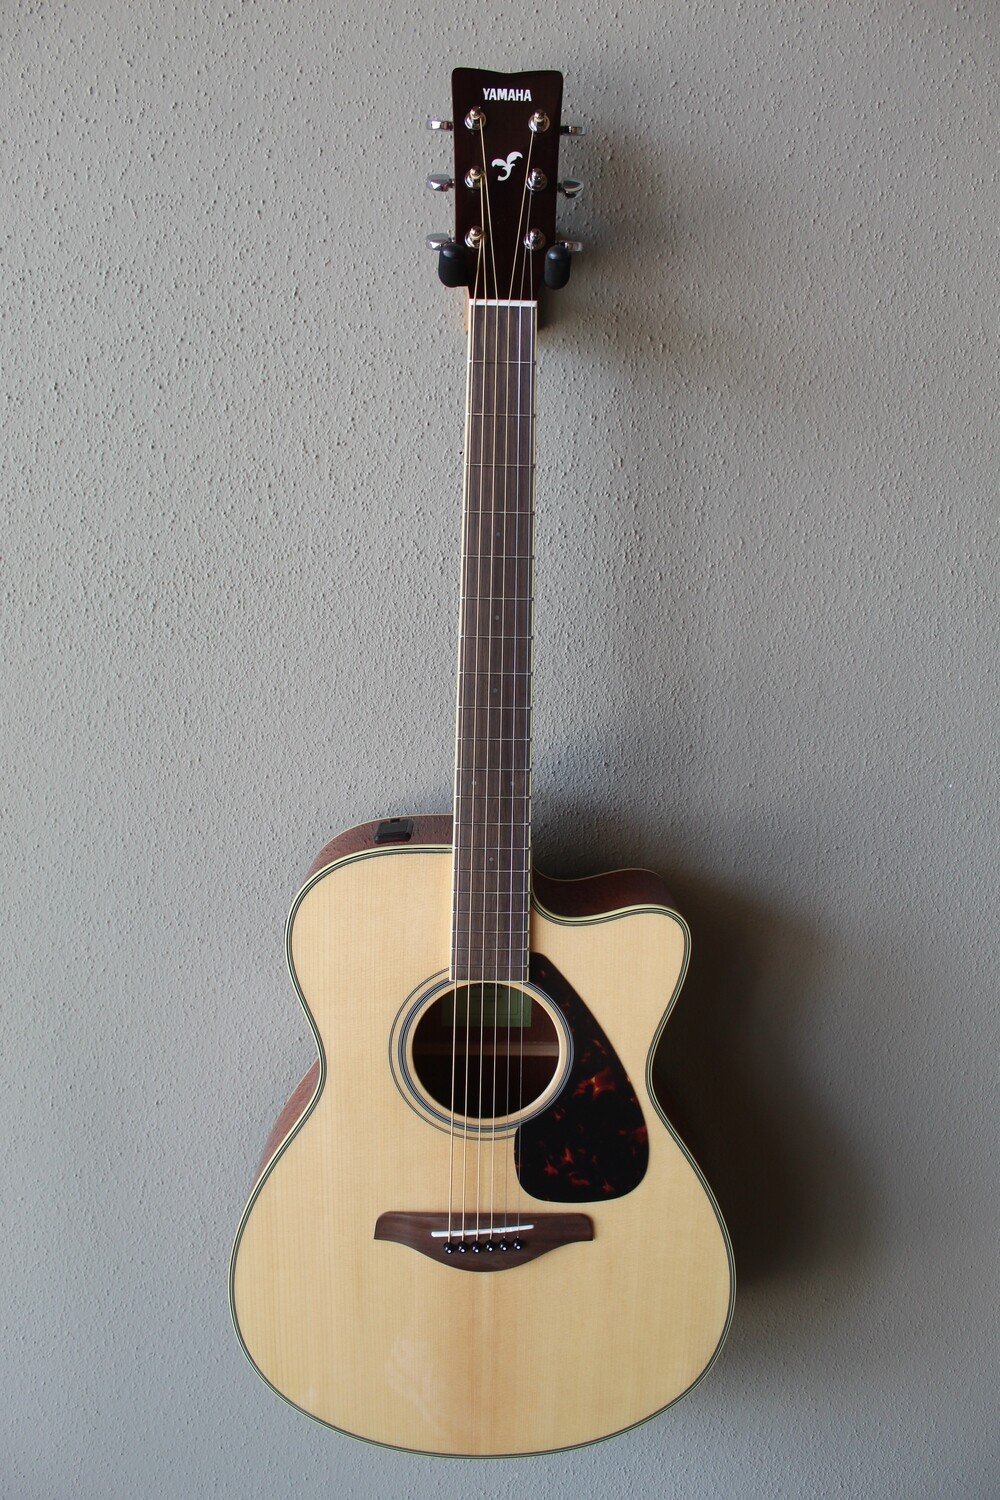 Yamaha FSX820C Steel String Acoustic/Electric Guitar with Gig Bag